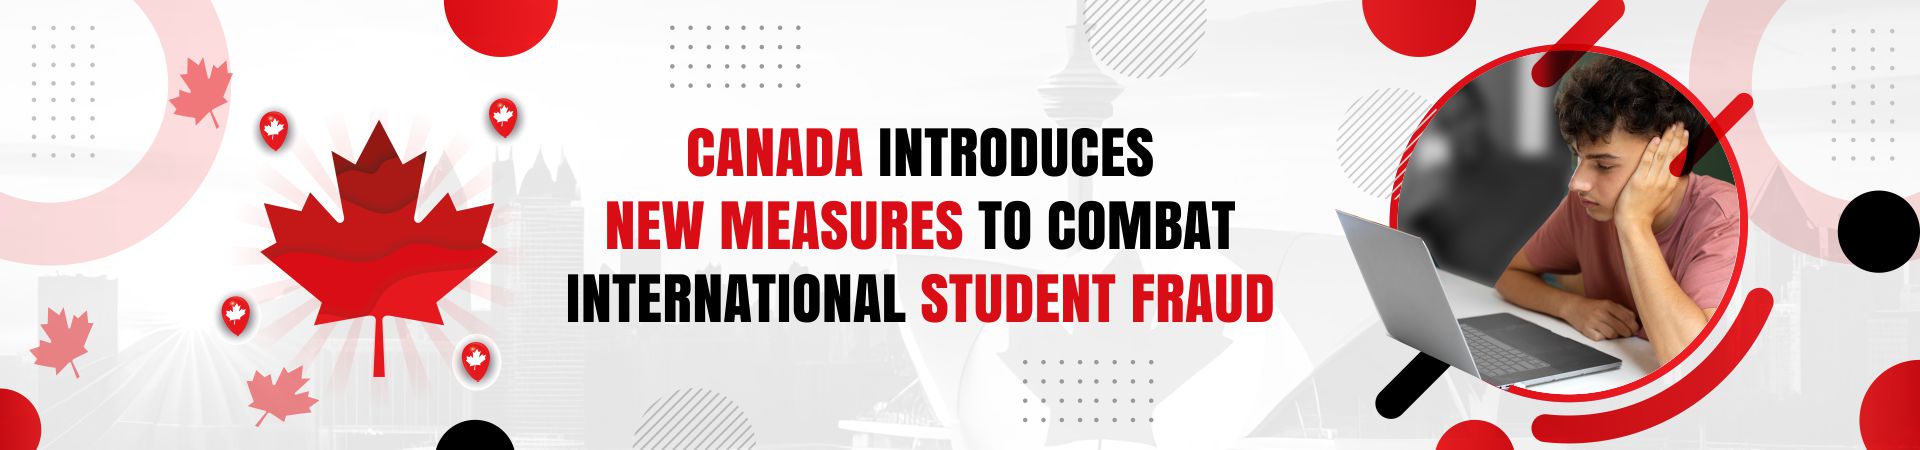 Canada Introduces New Measures to Combat International Student Fraud